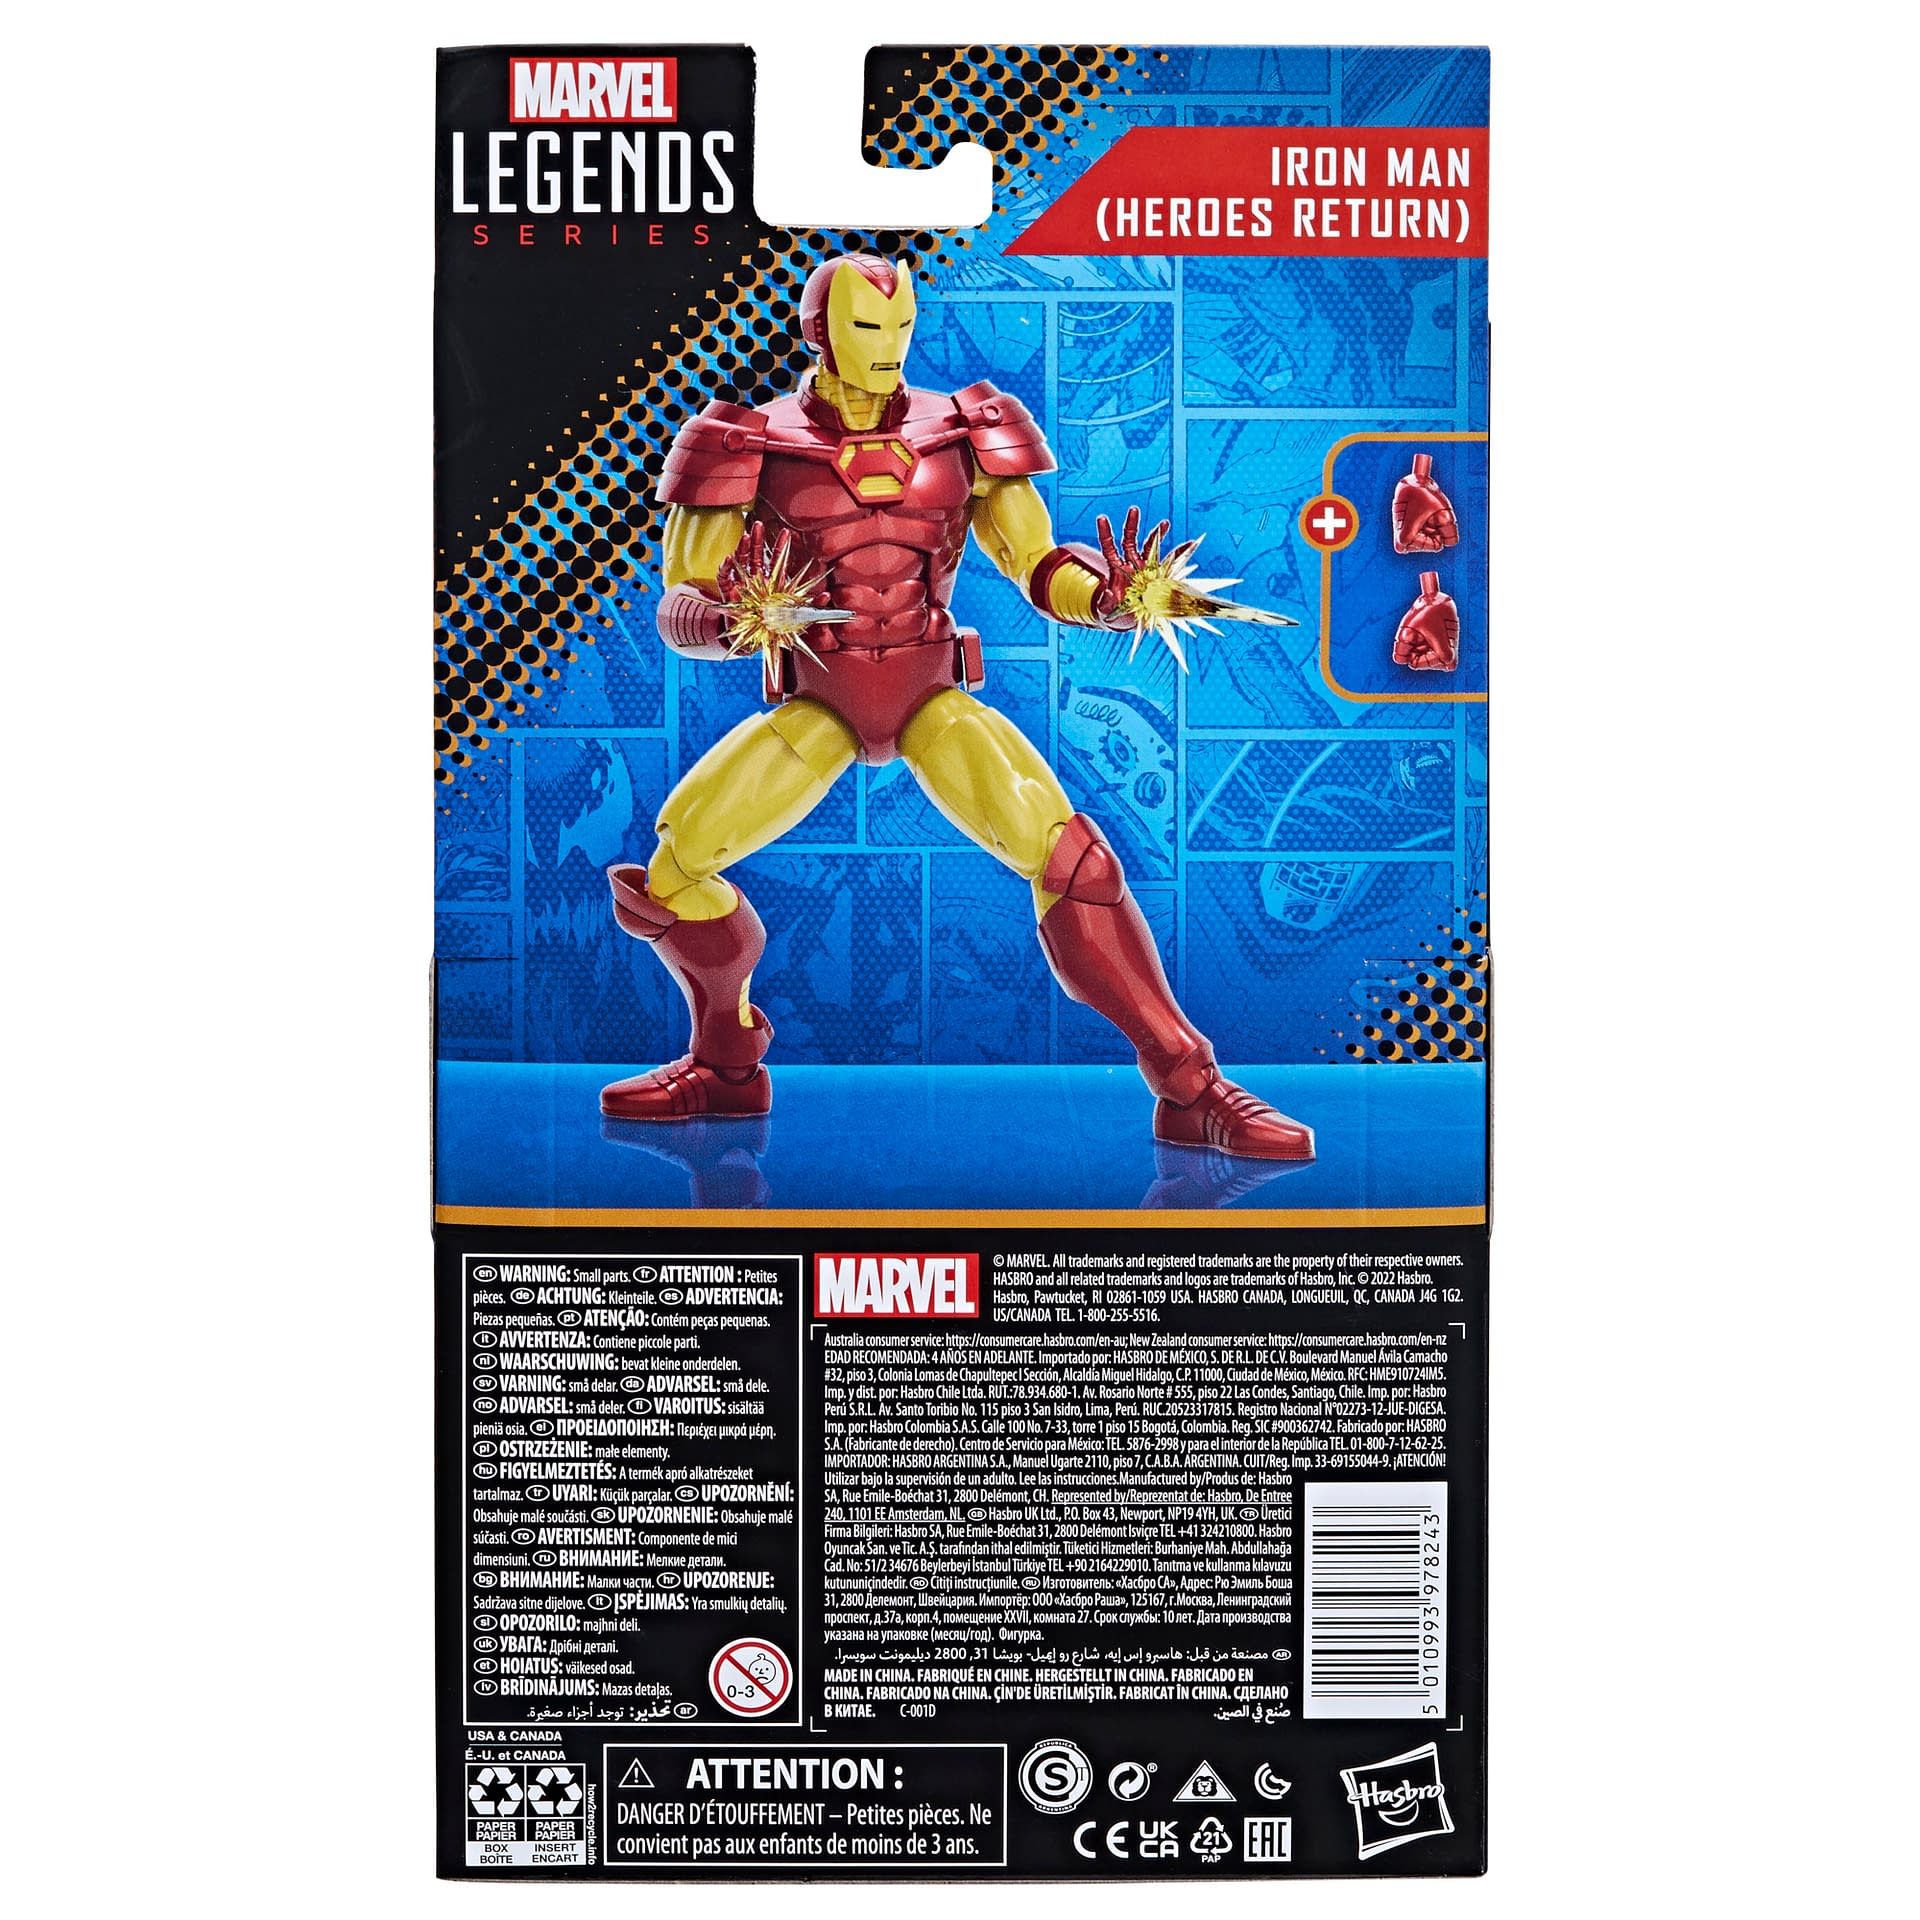 Hasbro Unveils New The Marvels Legends Wave with Captain Marvel 